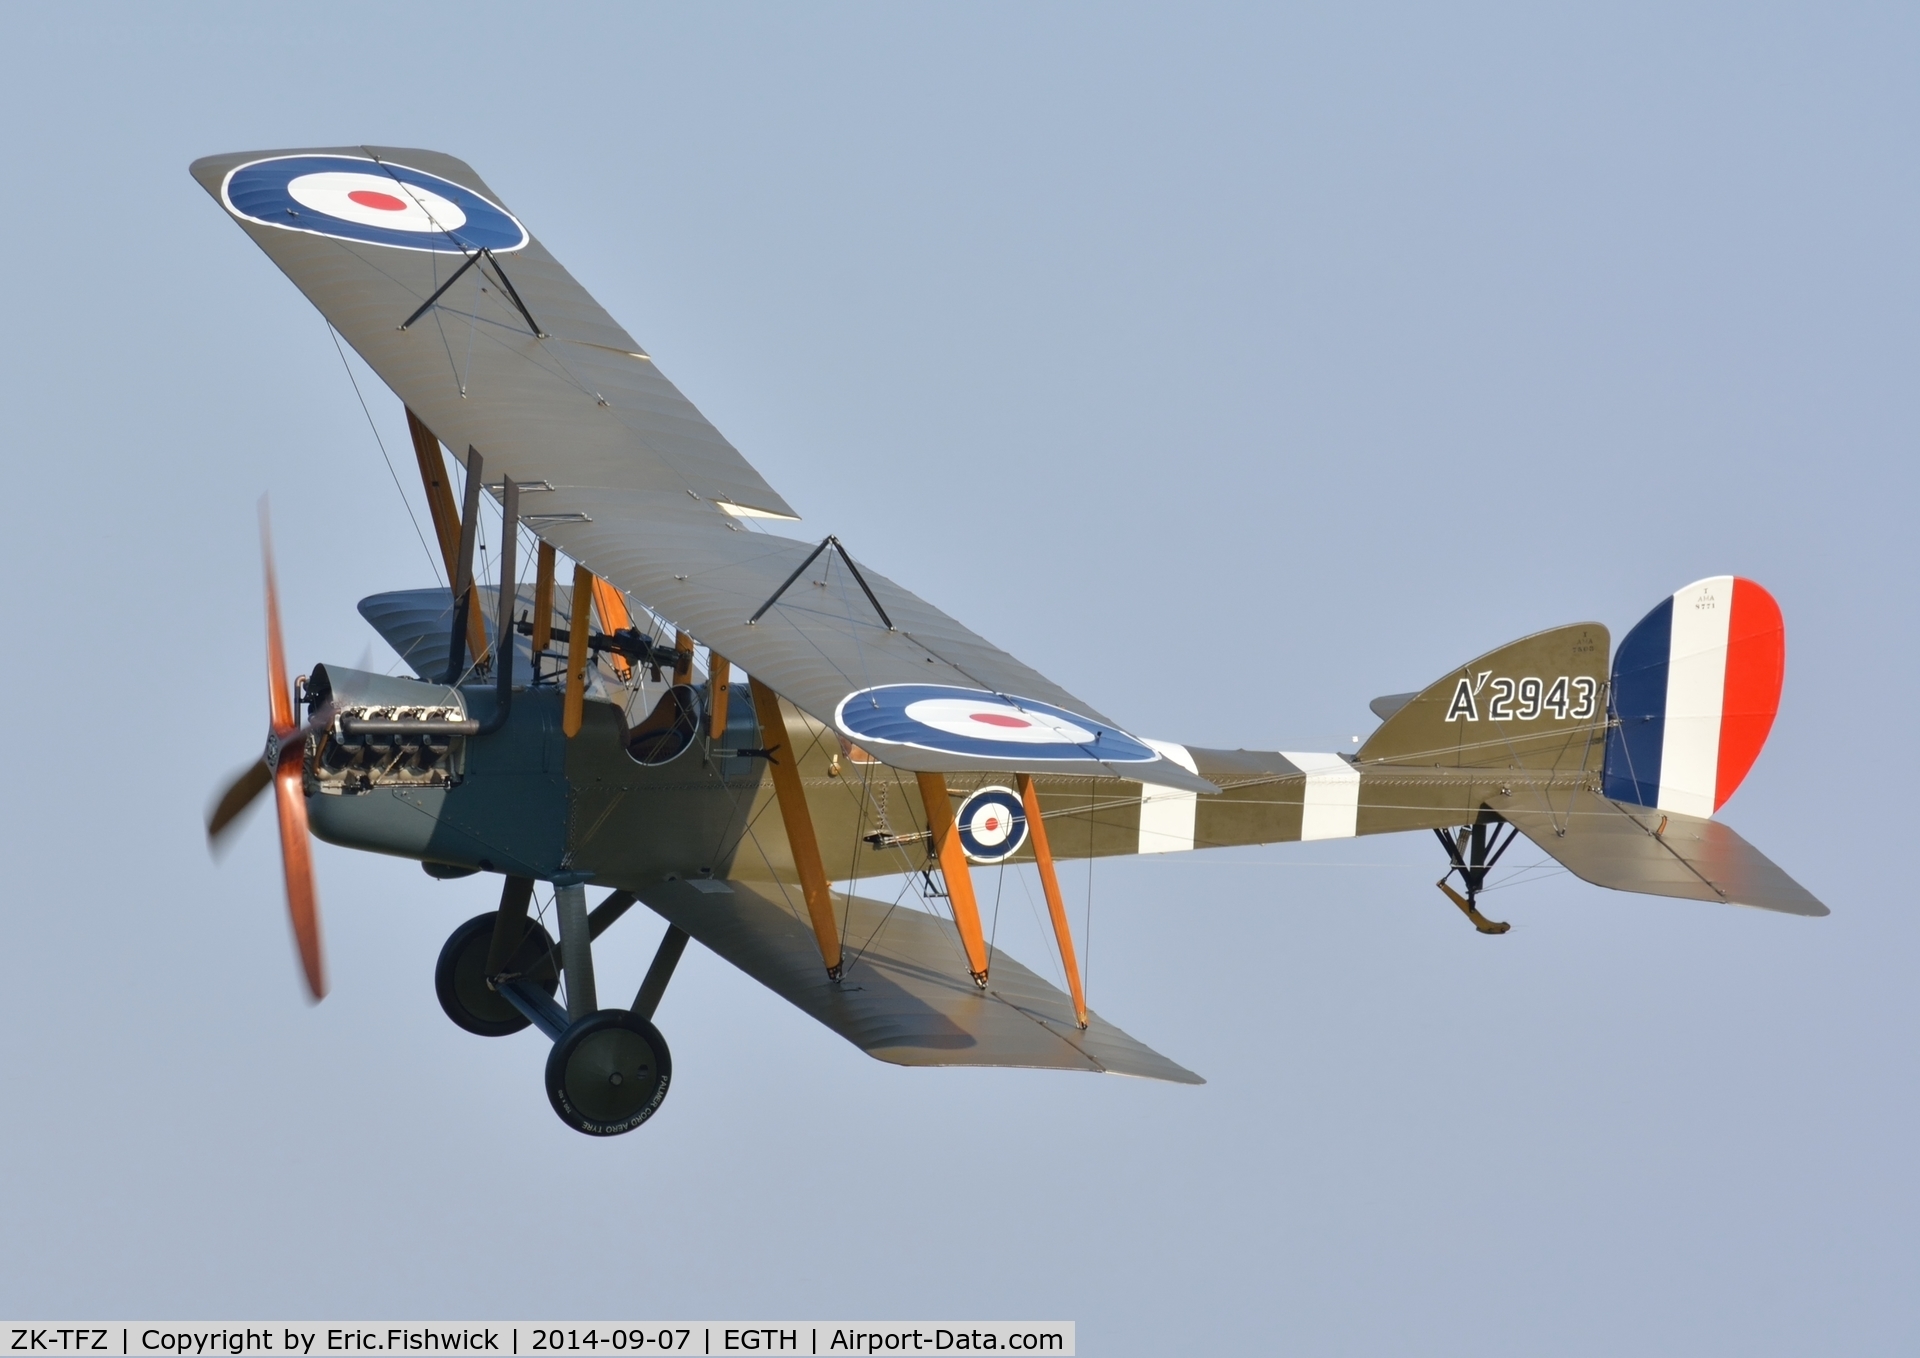 ZK-TFZ, Royal Aircraft Factory BE-2e Replica C/N 753, 43. A'2943 in display mode at the glorious Shuttleworth Pagent Airshow, Sep. 2014.